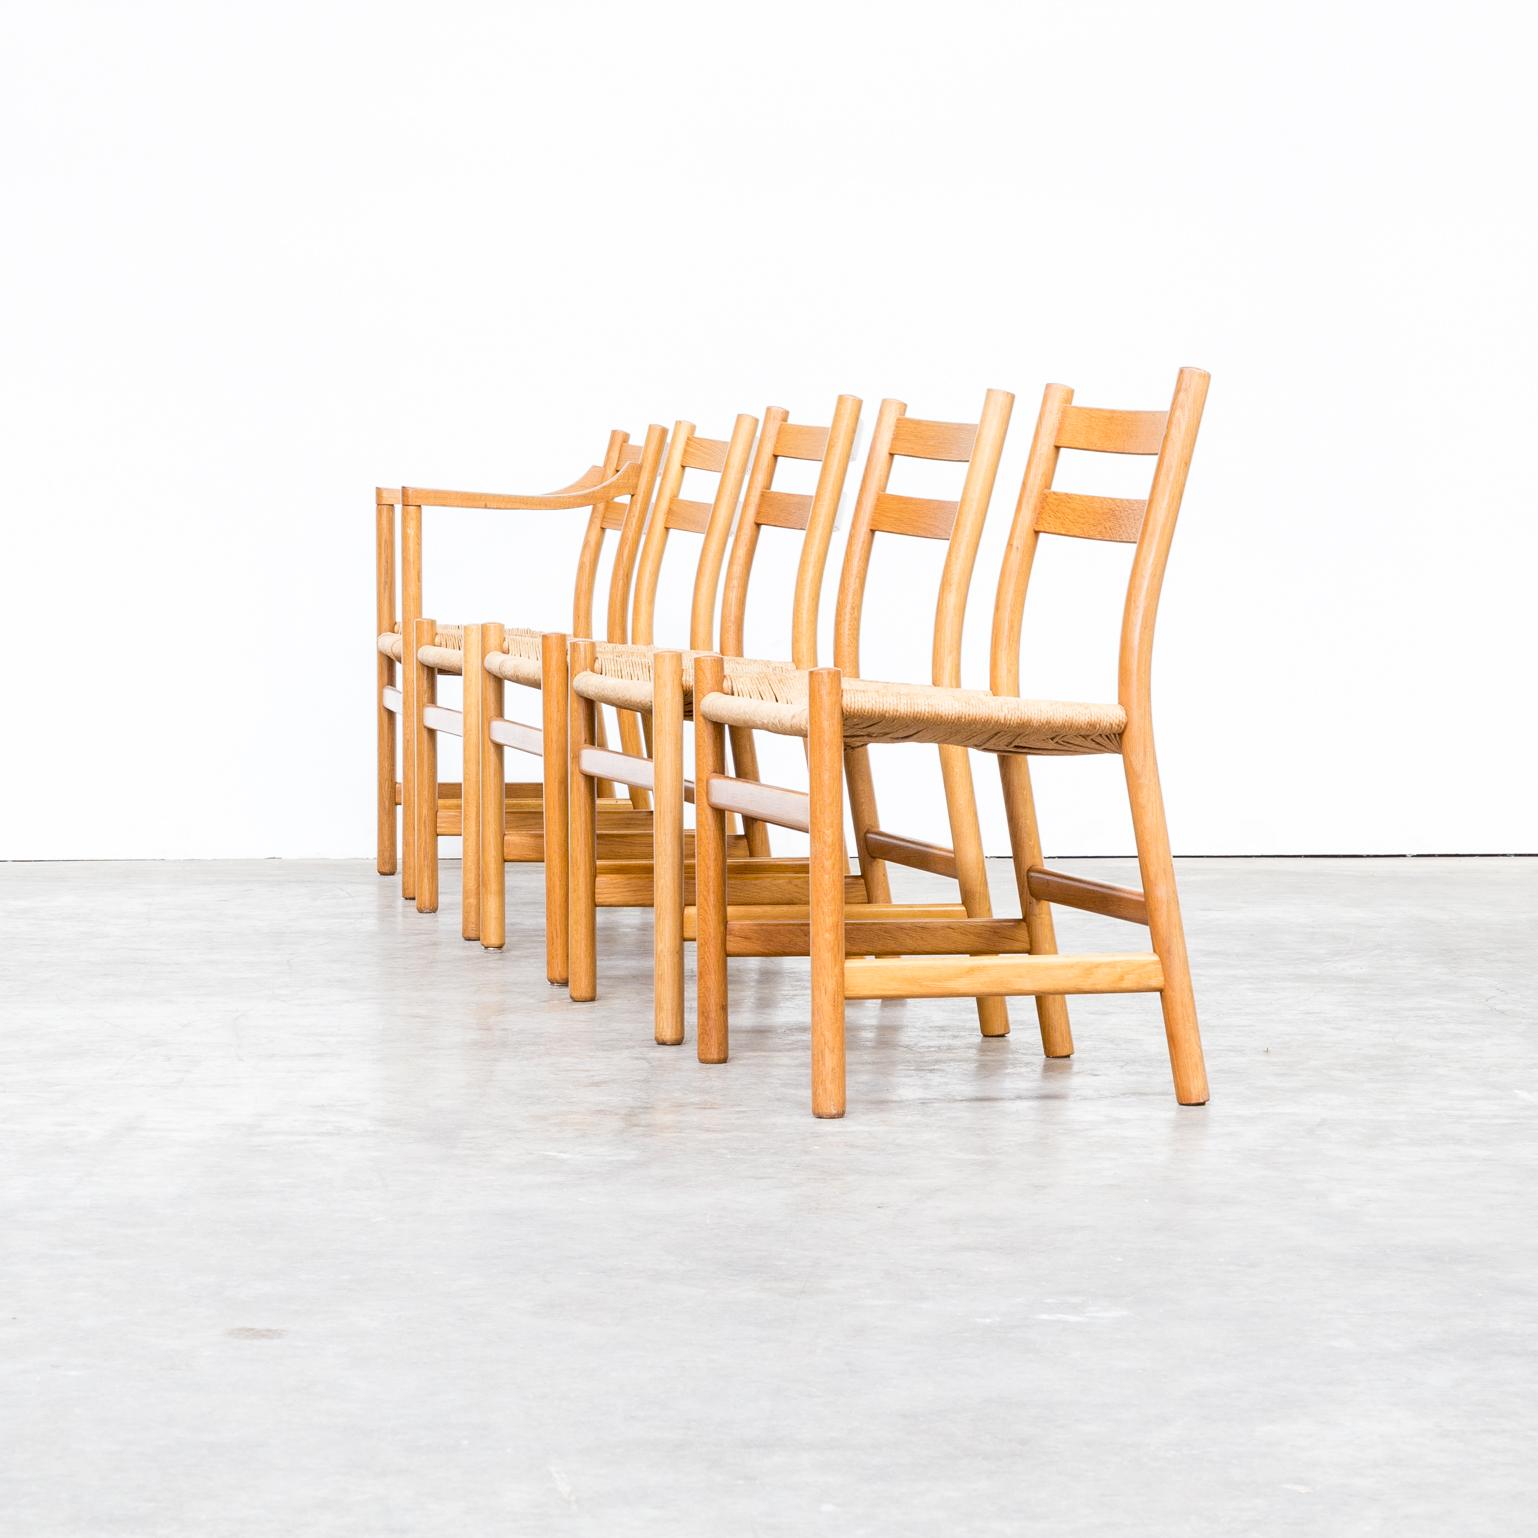 1960s Hans Wegner ‘CH47’ chairs and ‘CH46’ chair for Carl Hansen & Son set of 5.